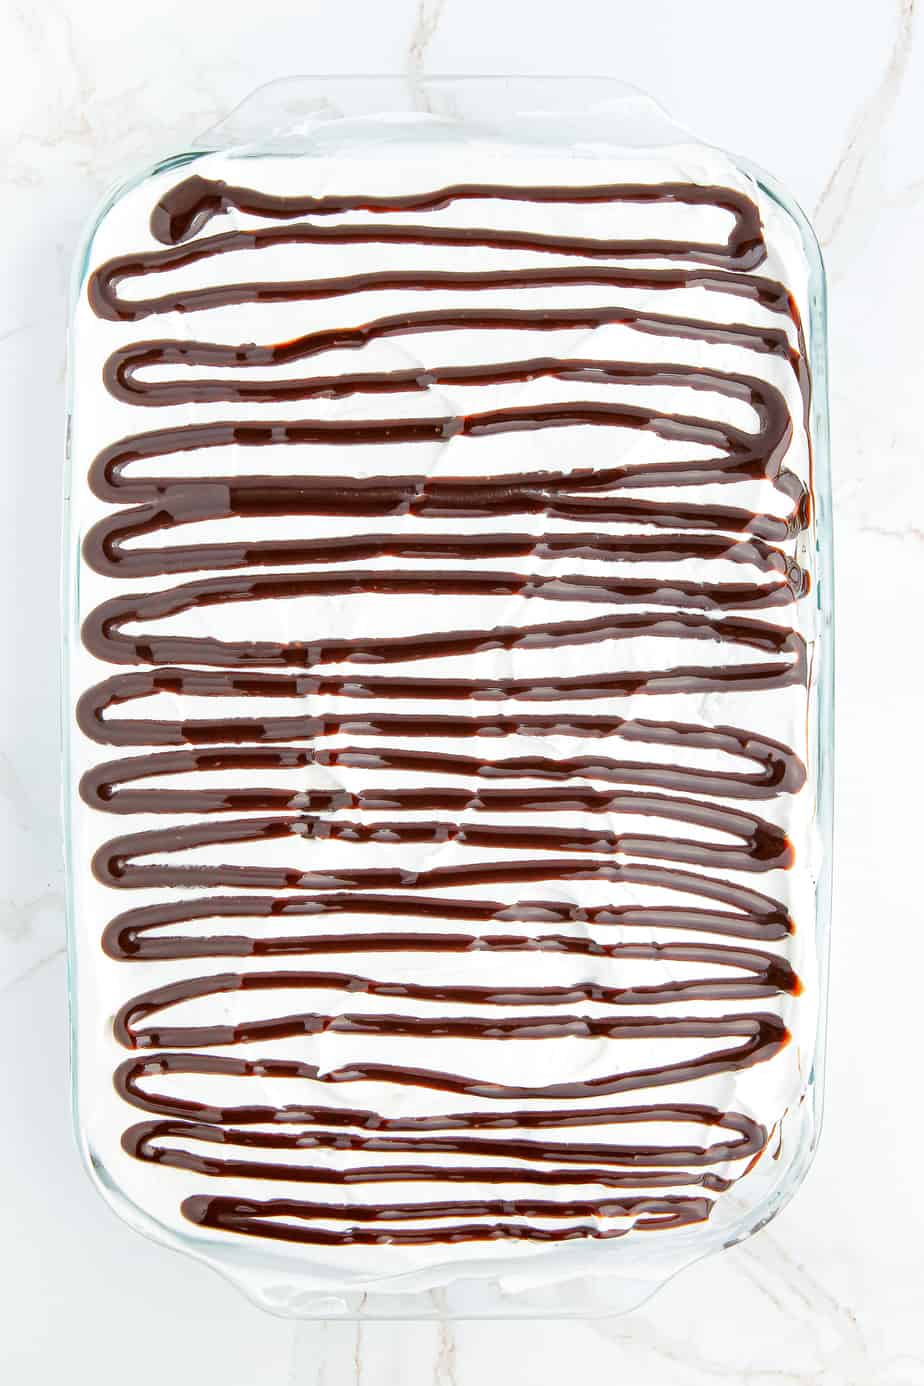 Chocolate sauce drizzled over whipped cream layer of an ice cream cake in a large glass rectangular baking dish.